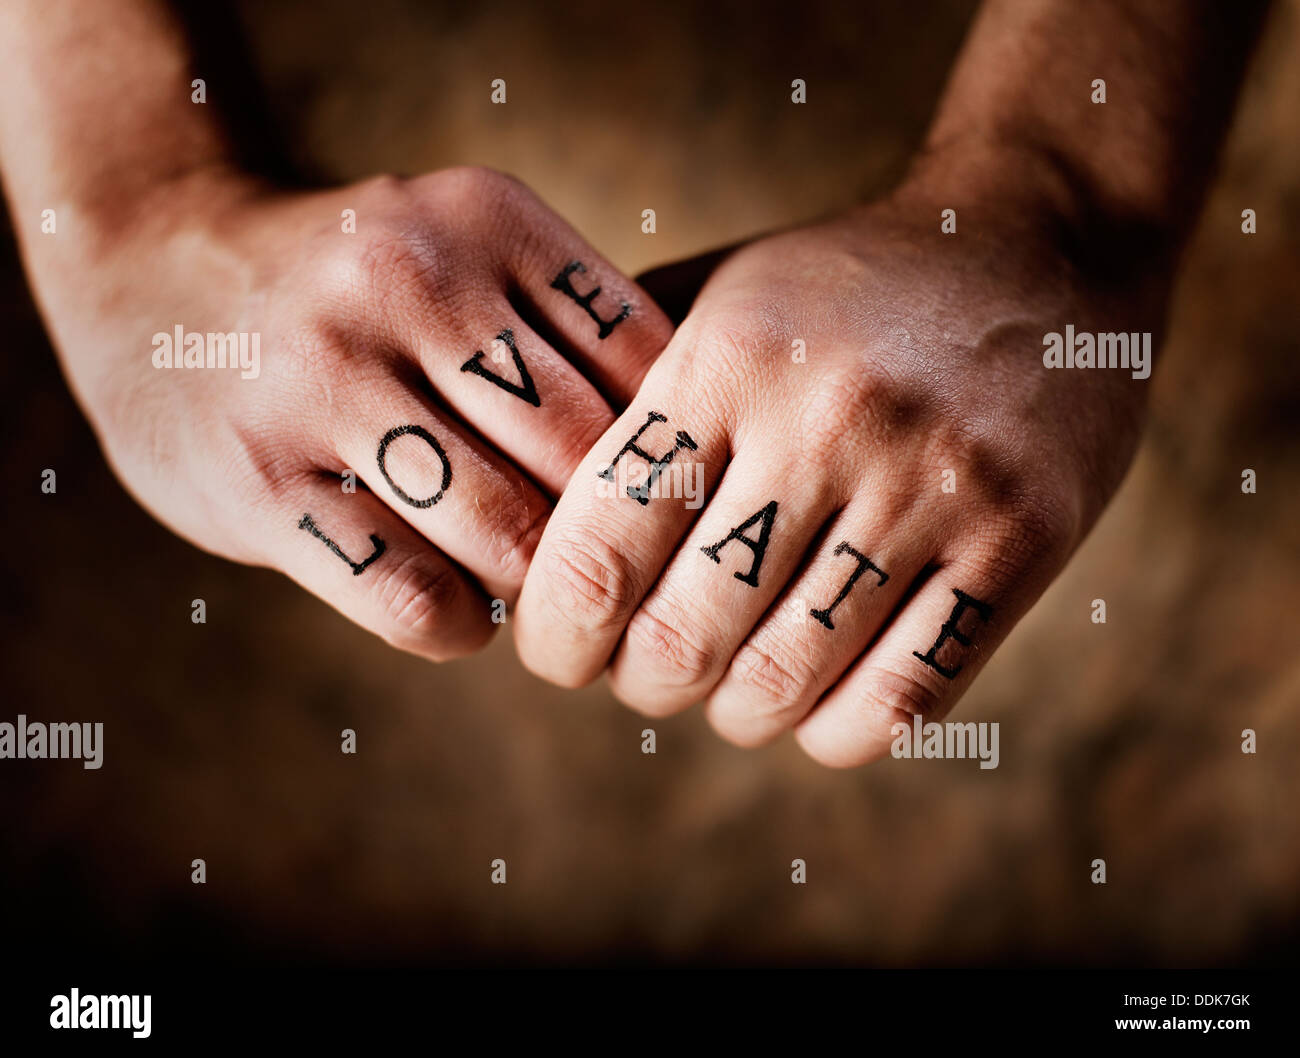 Man with (fake) Love and Hate knuckle tattoos. Stock Photo